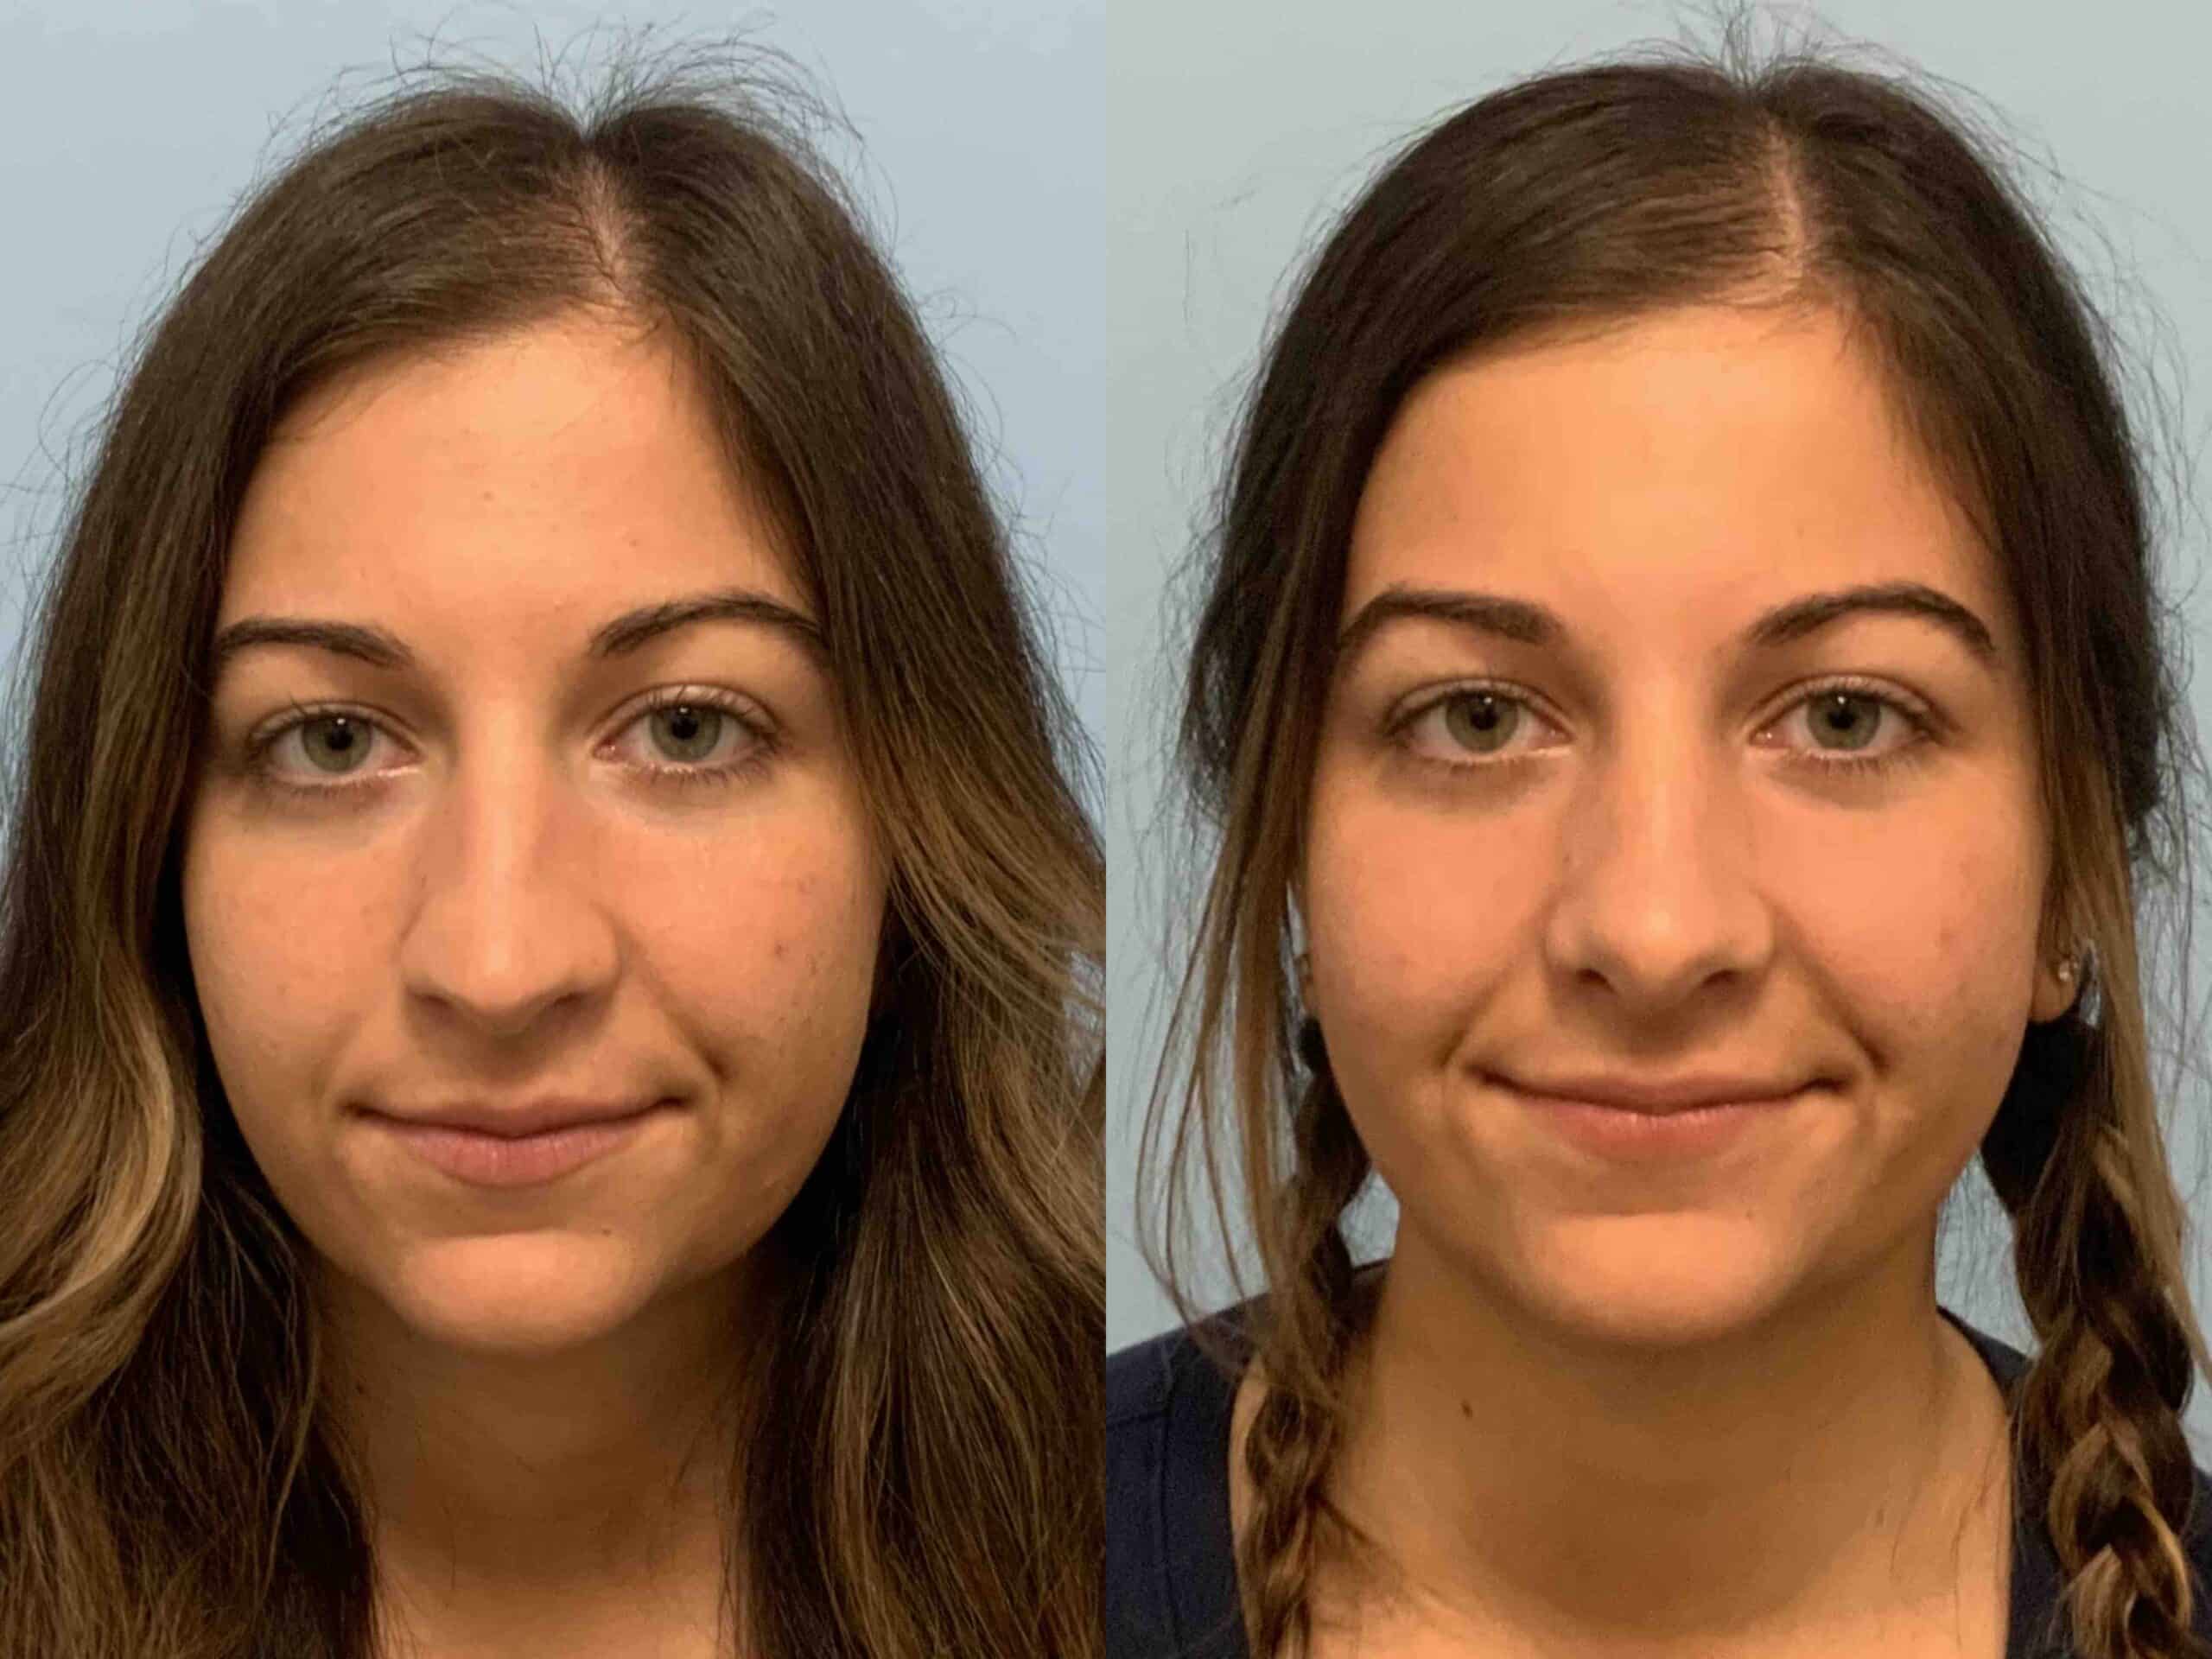 Before and after, 1 mo post op from Rhinoplasty performed by Dr. Paul Vanek